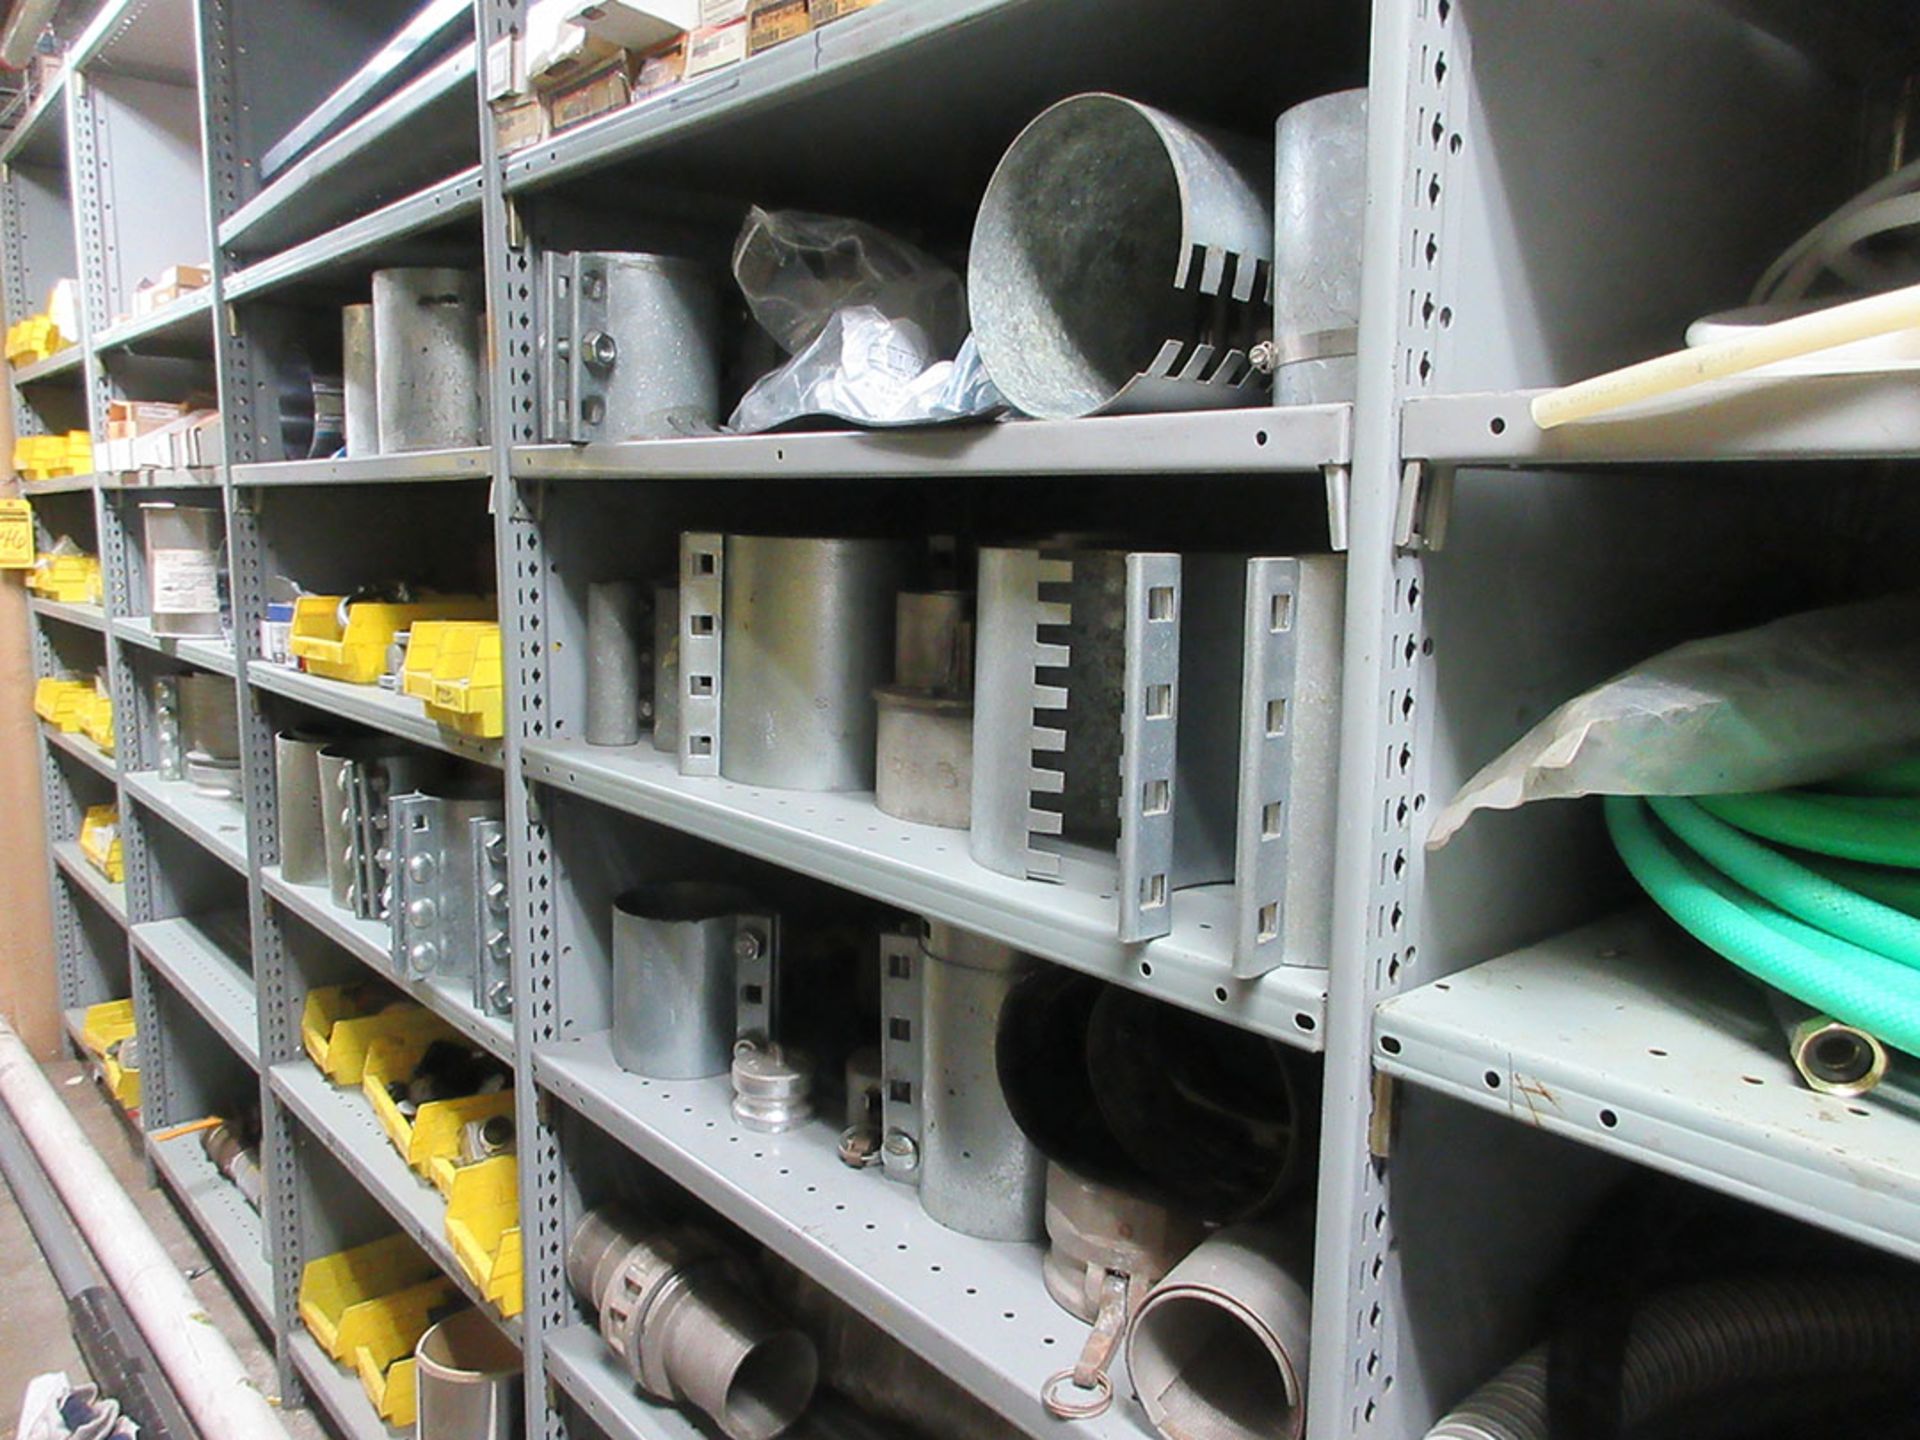 (16) SECTIONS OF ASSORTED SHELVING WITH CONTENTS; HARDWARE, BEARINGS, AIR TANKS, HOSE, PULLEYS, - Image 10 of 13